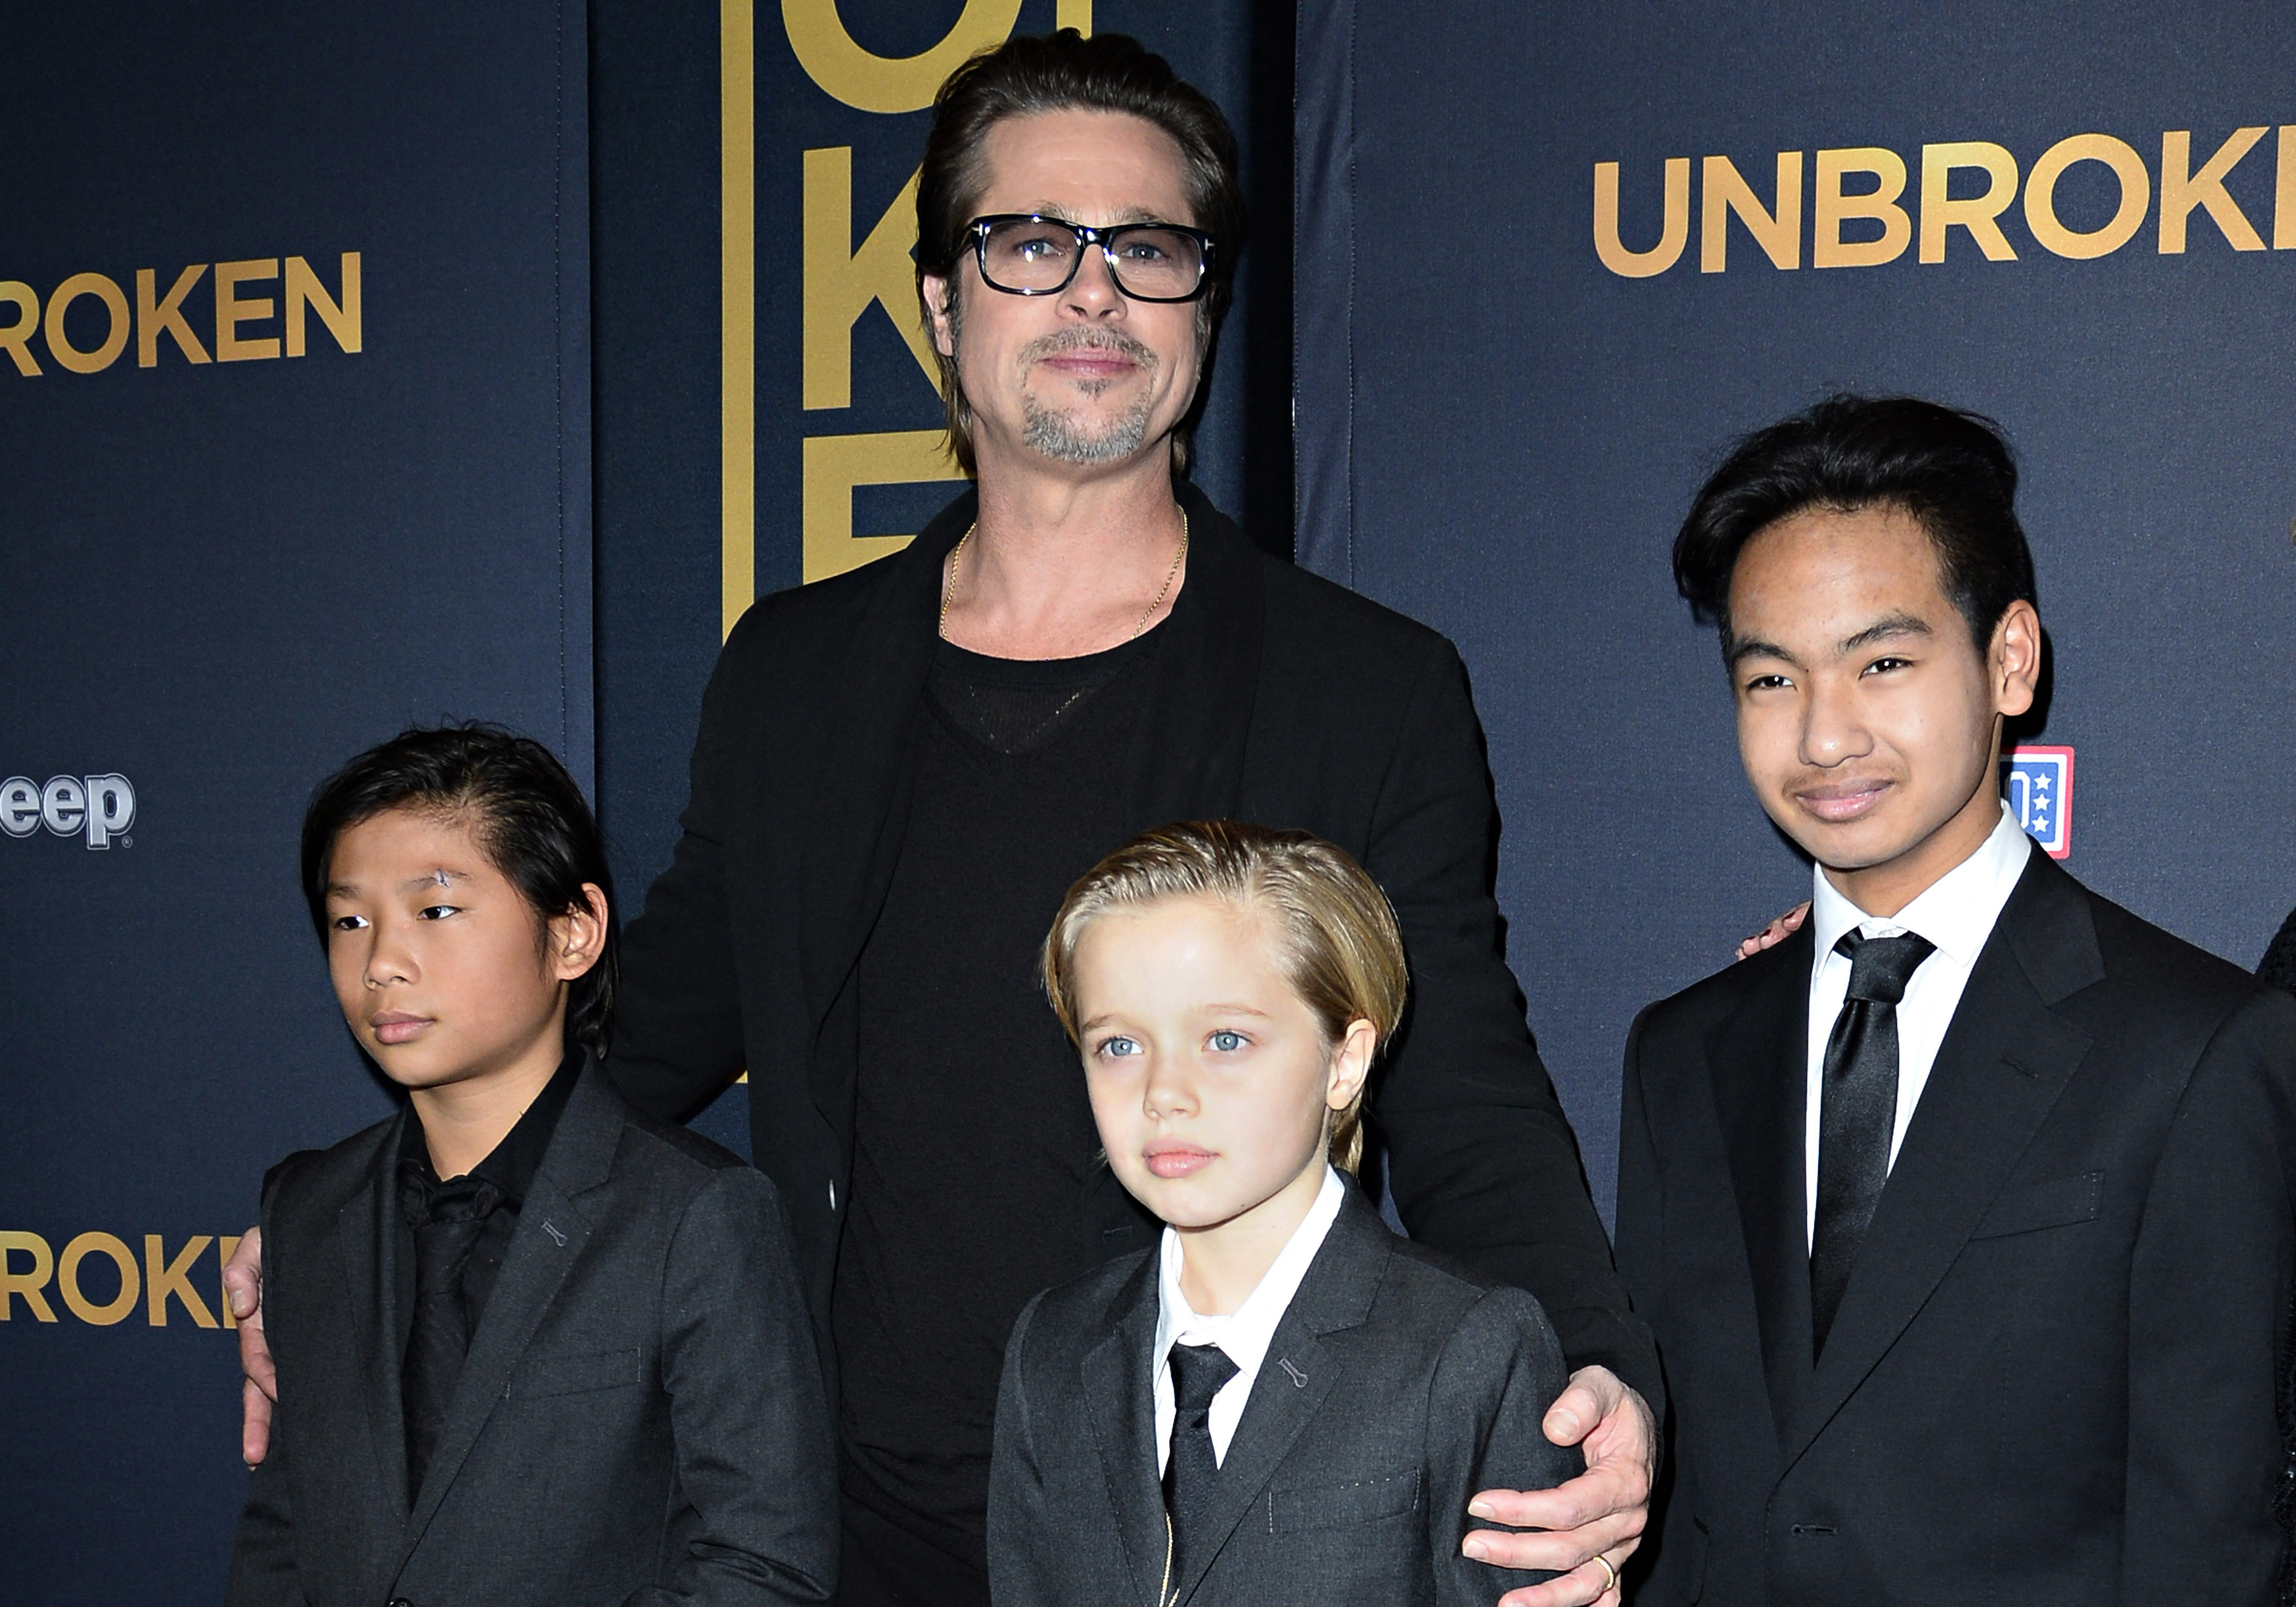 Brad Pitt with his children children Pax Shiloh and Maddox at the premiere of "Unbroken," in Los Angeles in 2014 | Source: Getty Images